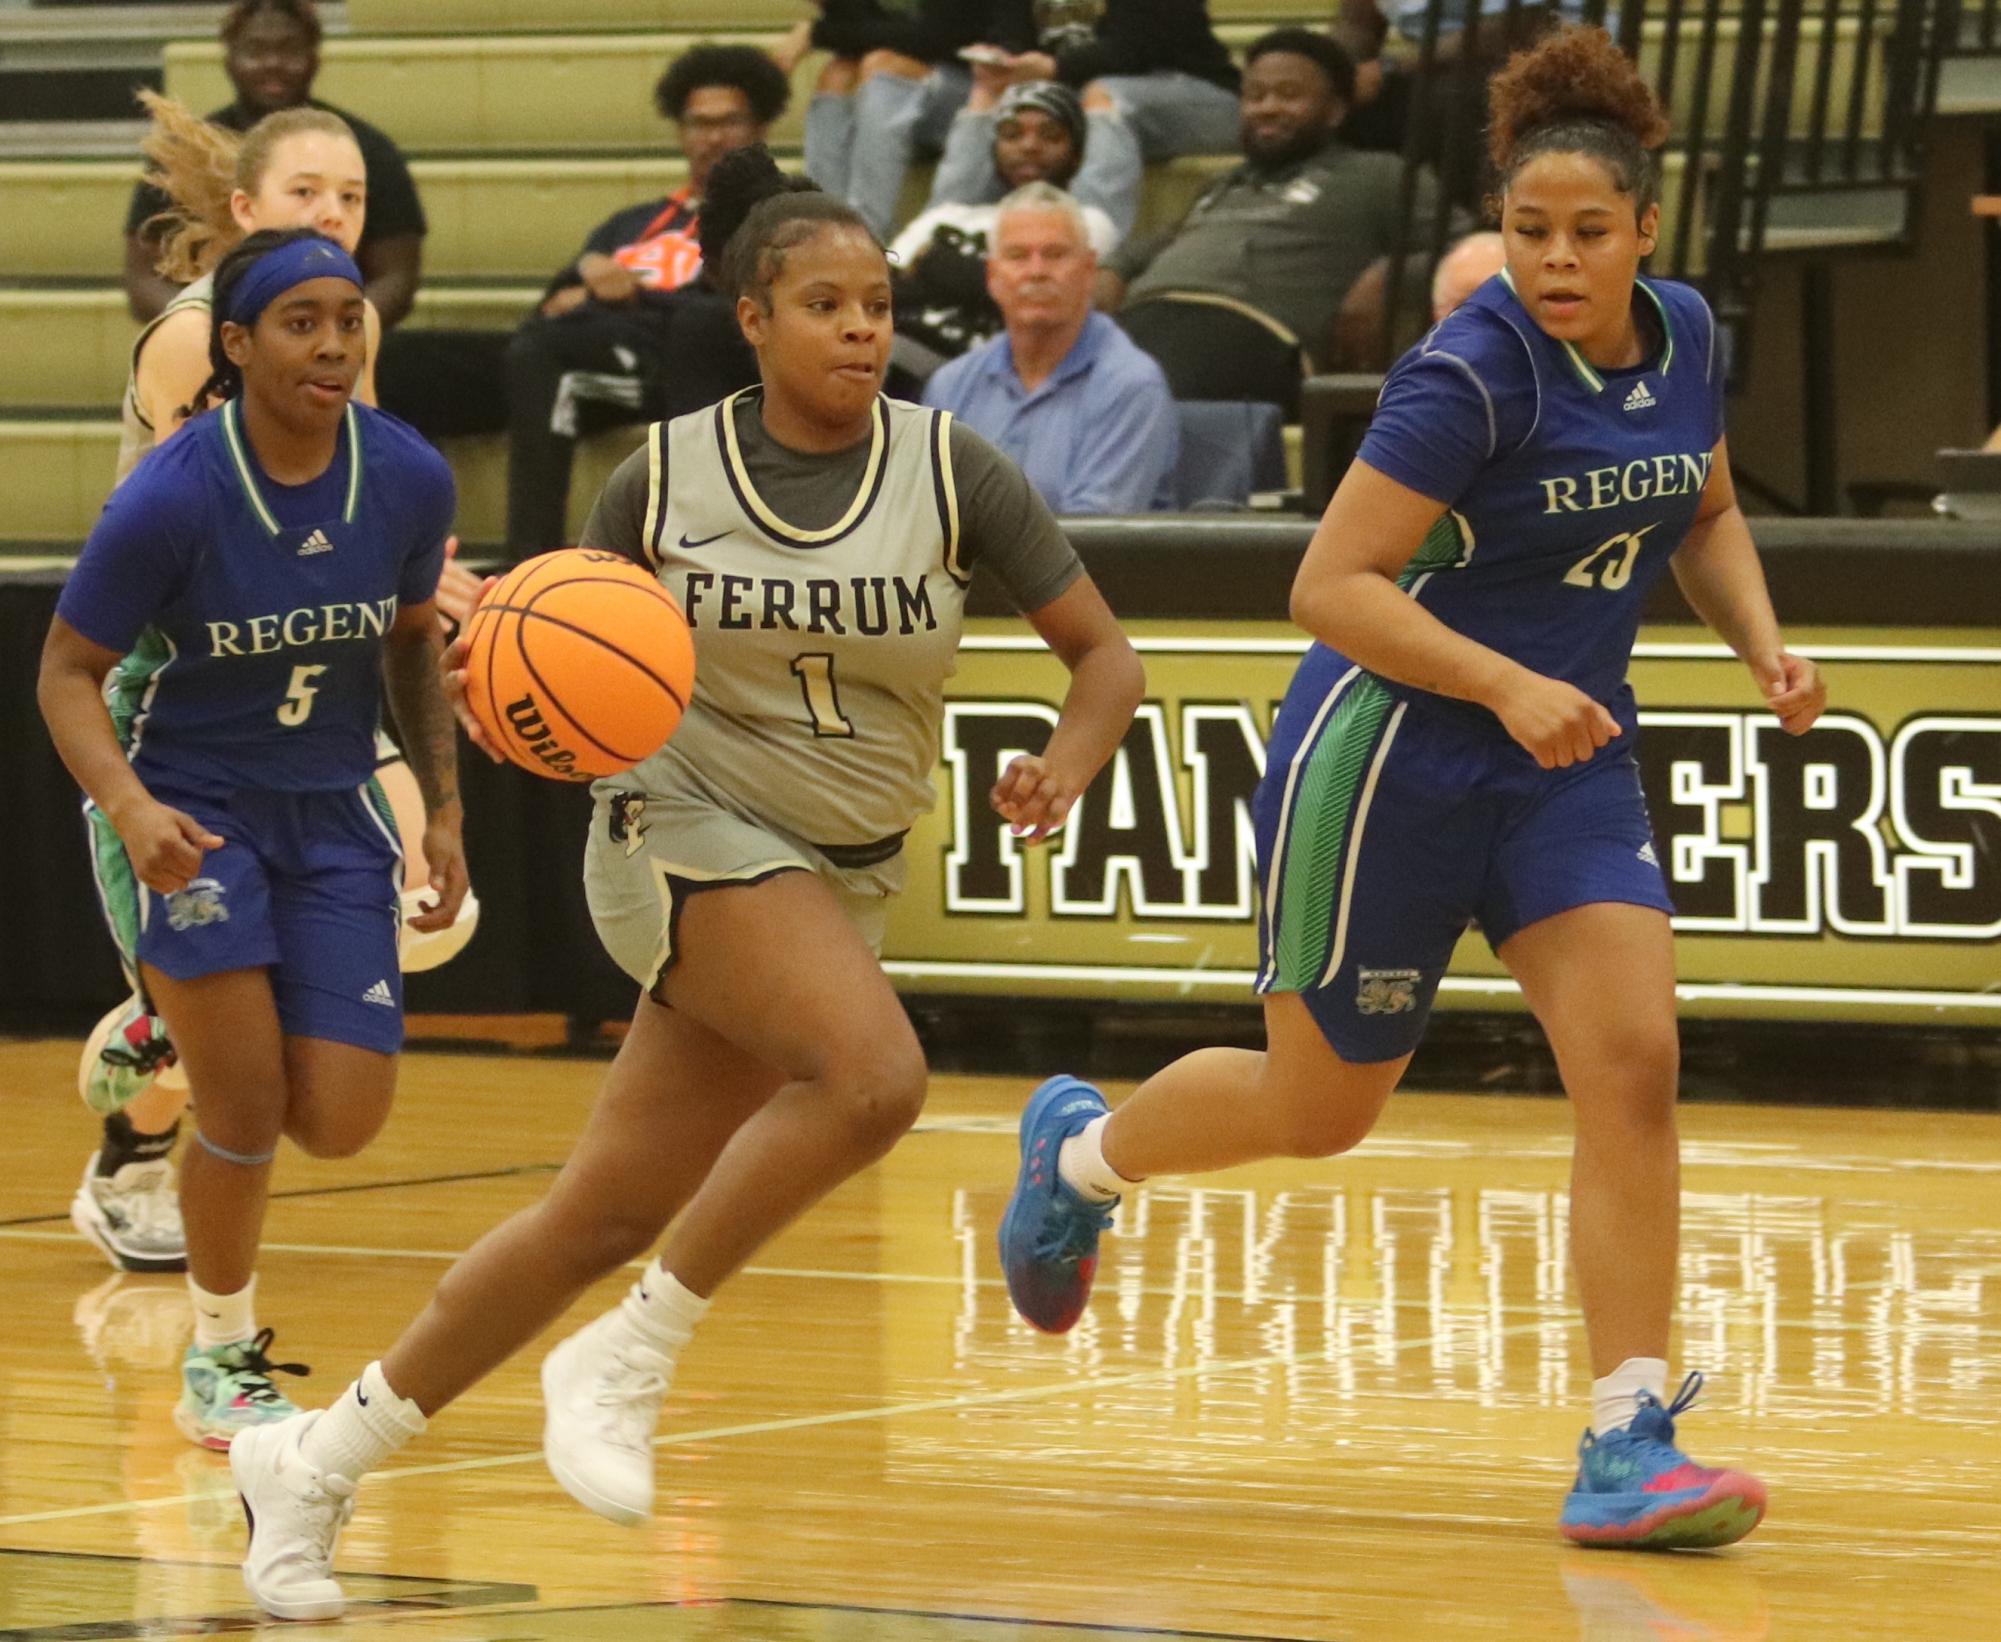 Kayla Cabiness, senior, brings the ball up the court against Regent University on Sunday in Swartz Gym. Cabiness was the games leading scorer with 28 points.